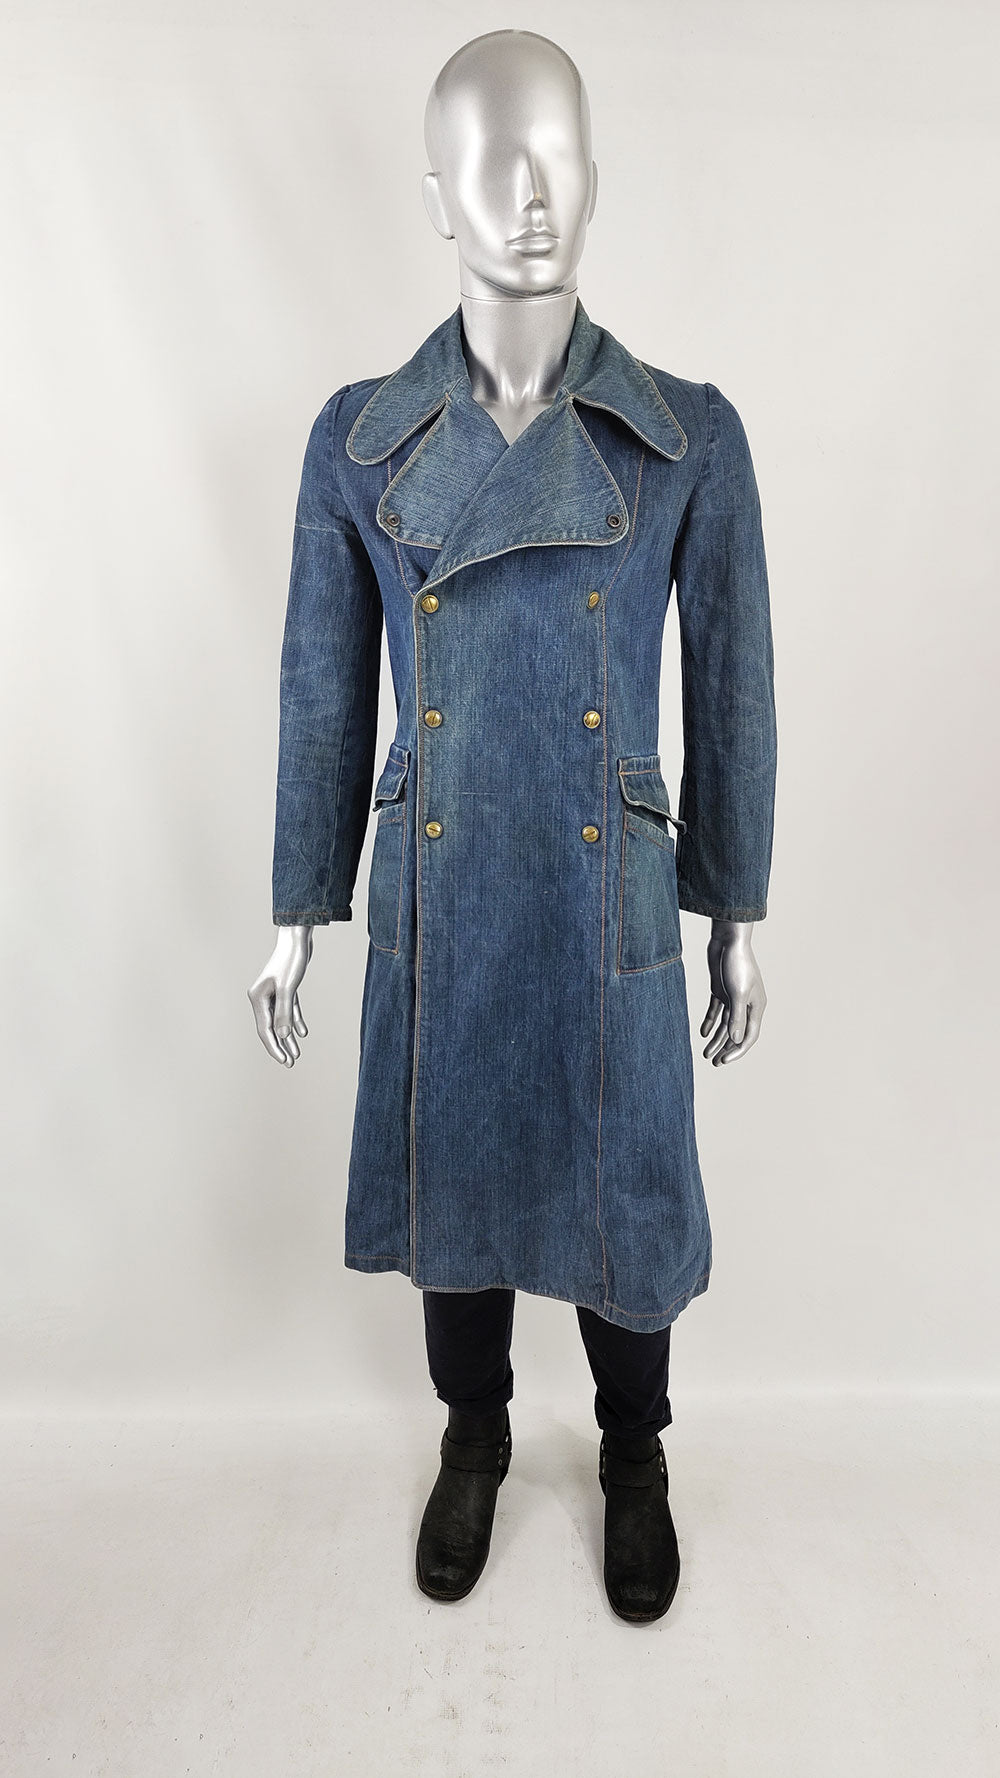 A vintage 1970s mens long denim coat with rounded lapels and double breasted front.